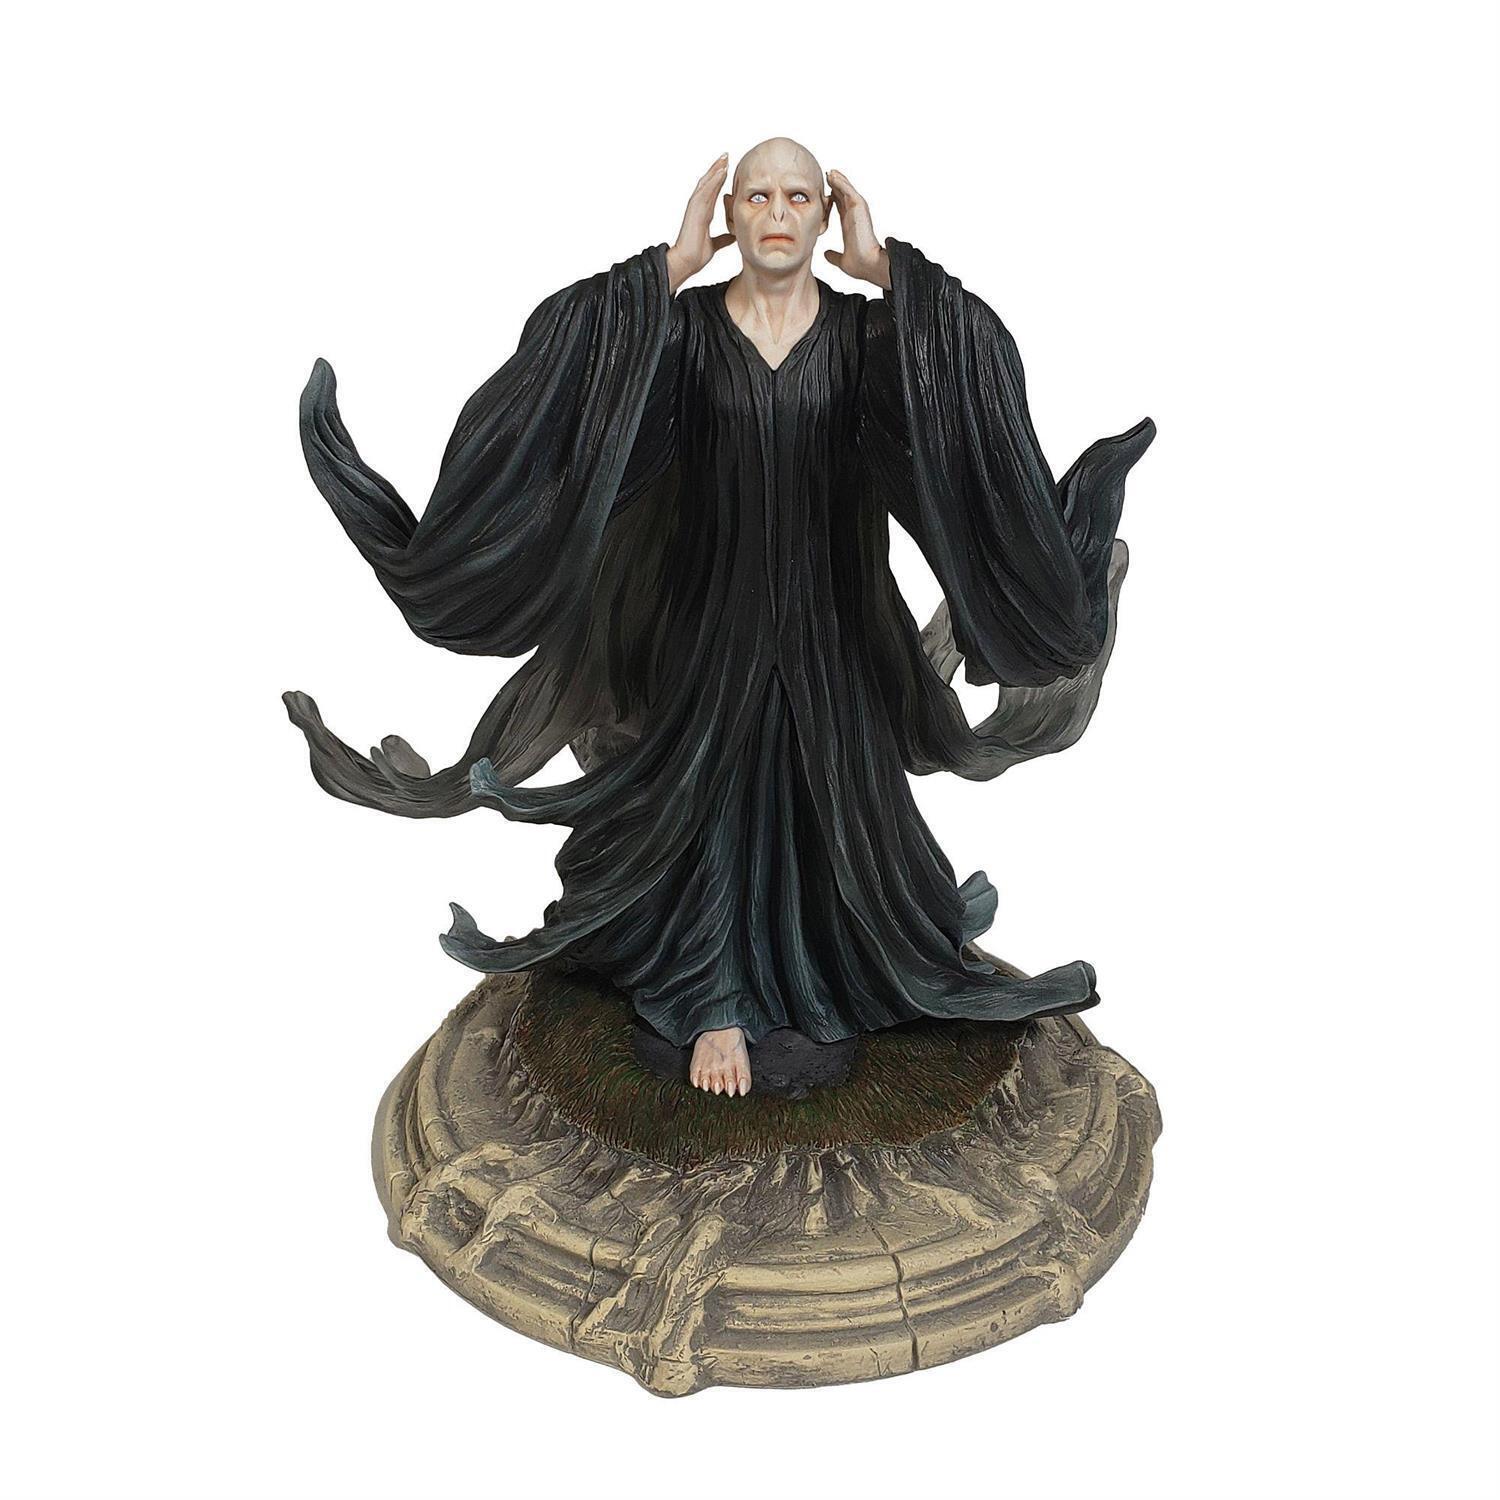 PRE-ORDER: Voldemort 1/8 Scale Statue By: Enesco Wizarding World of Harry Potter